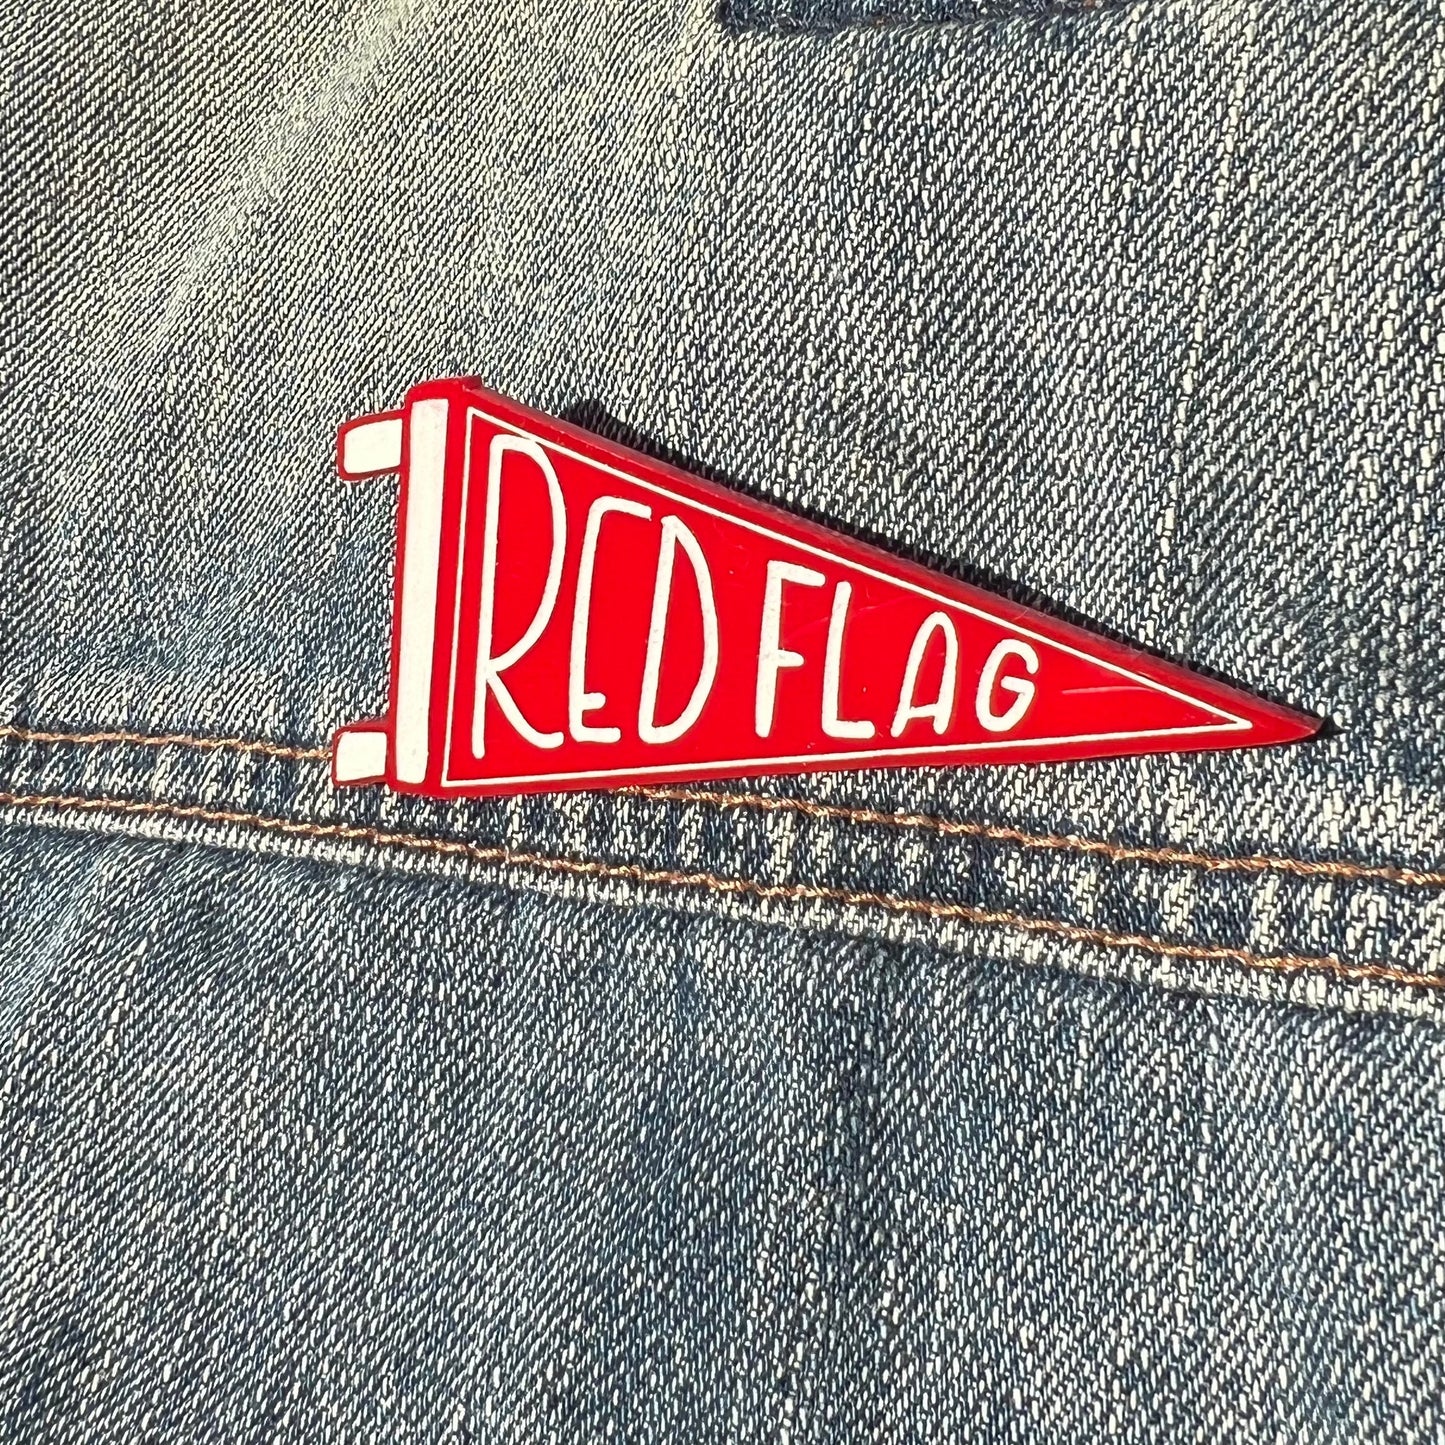 RED FLAG Pin back - Murderino accessory - Acrylic laser cut brooch, true crime pennant badge - pin back